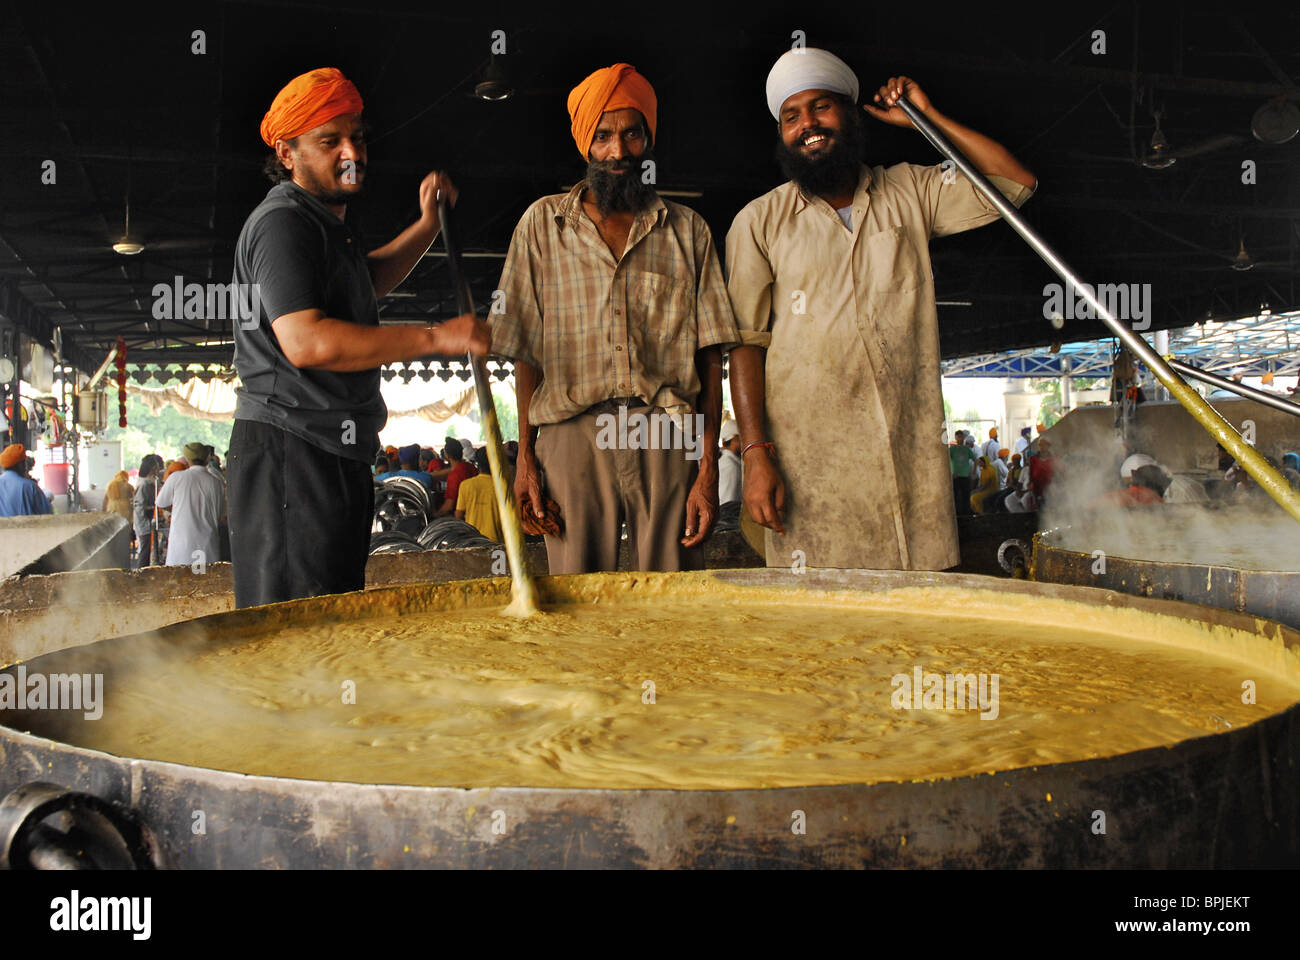 A cook in a Sikh kitchen cooking in an extremely large pot.